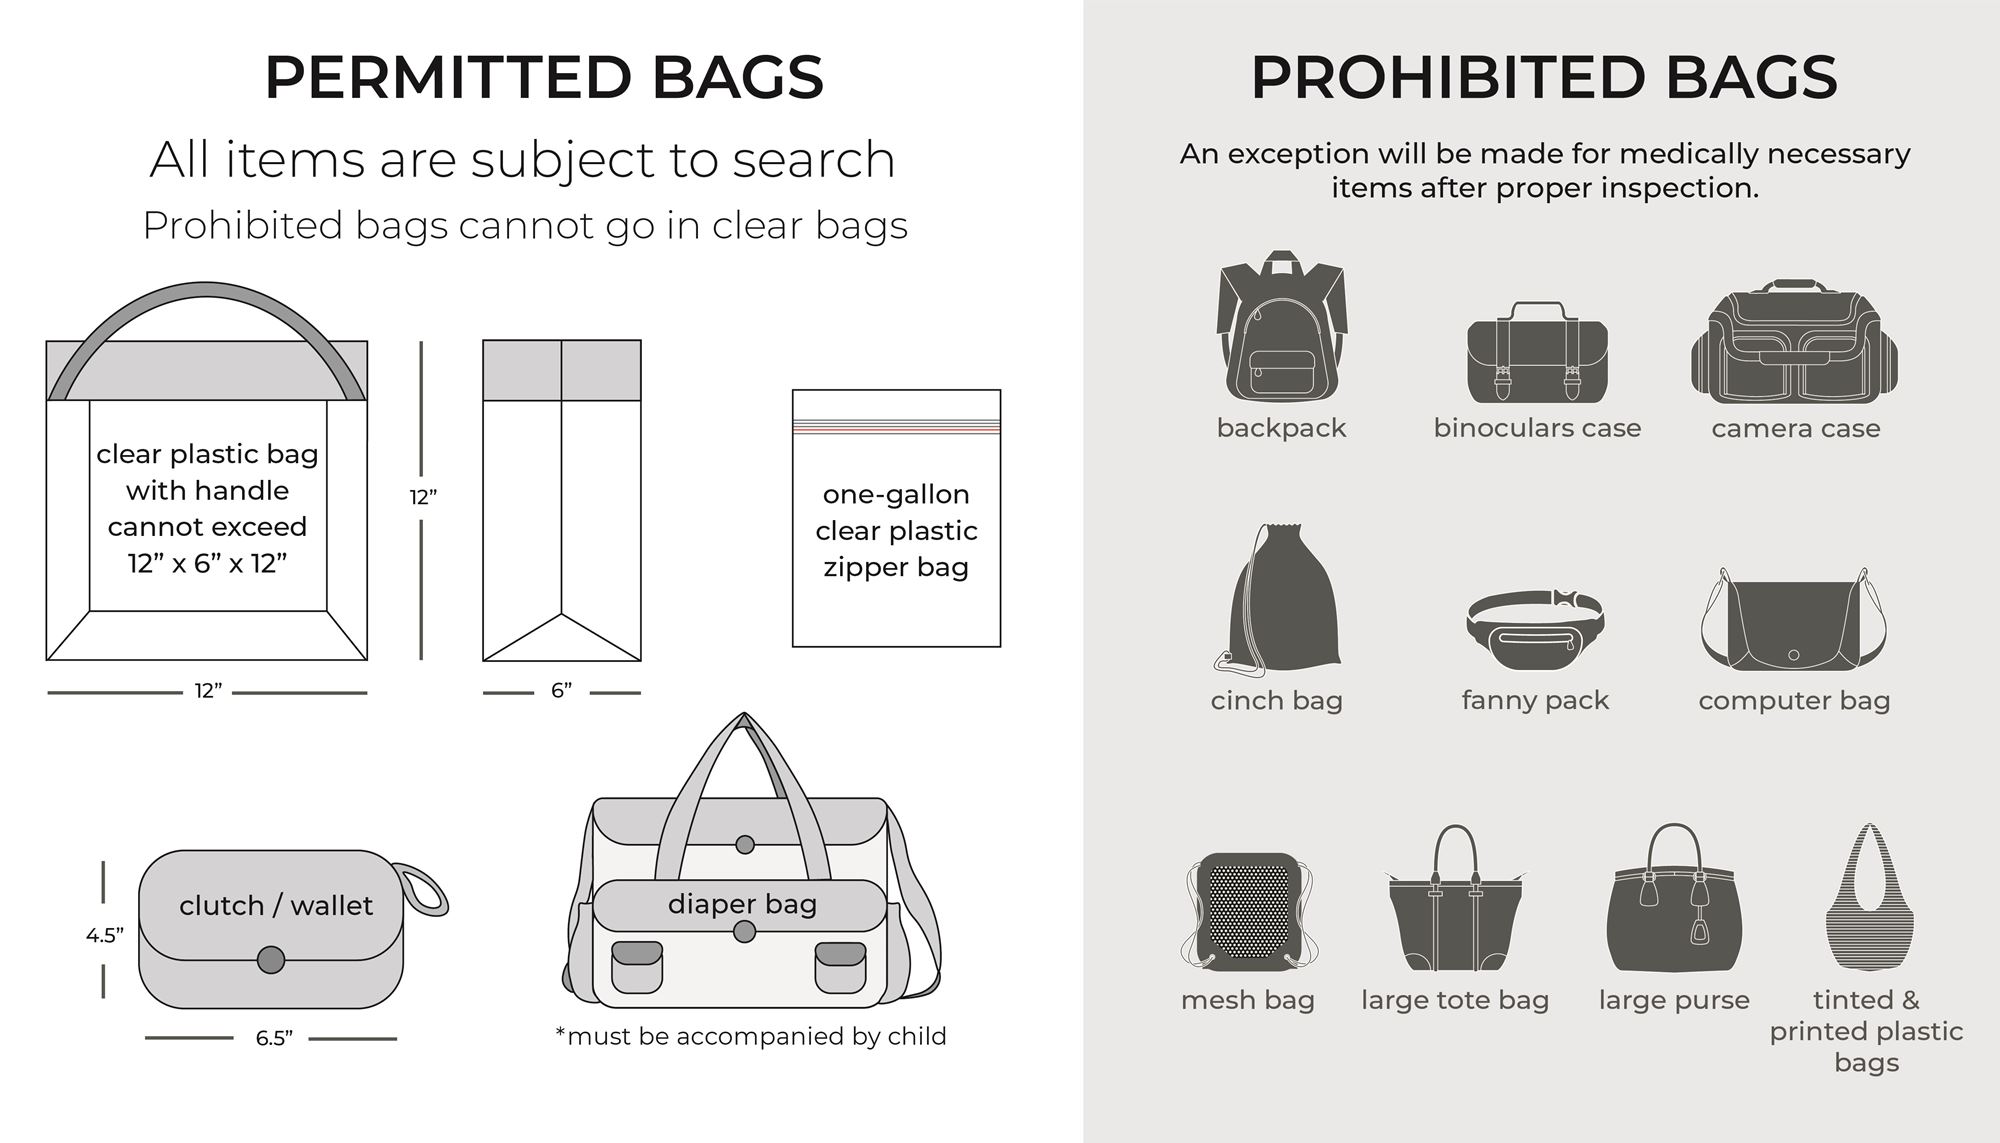 Permitted bags must be clear and no larger than 12" x 6" x 12". All bags subject to search. Medical exemptions made by security.